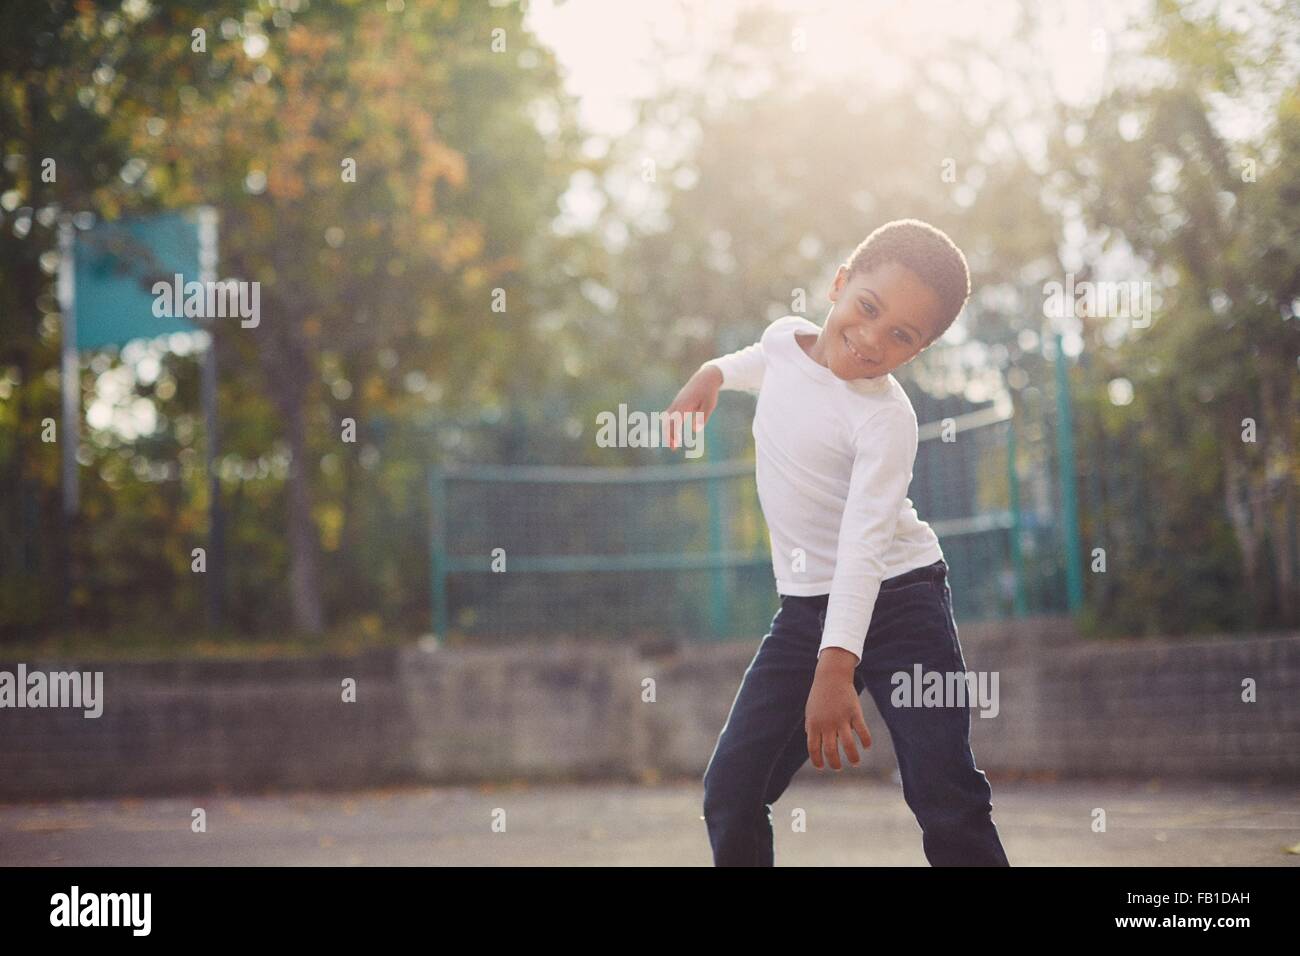 Elementary schoolboy dancing in playground Stock Photo